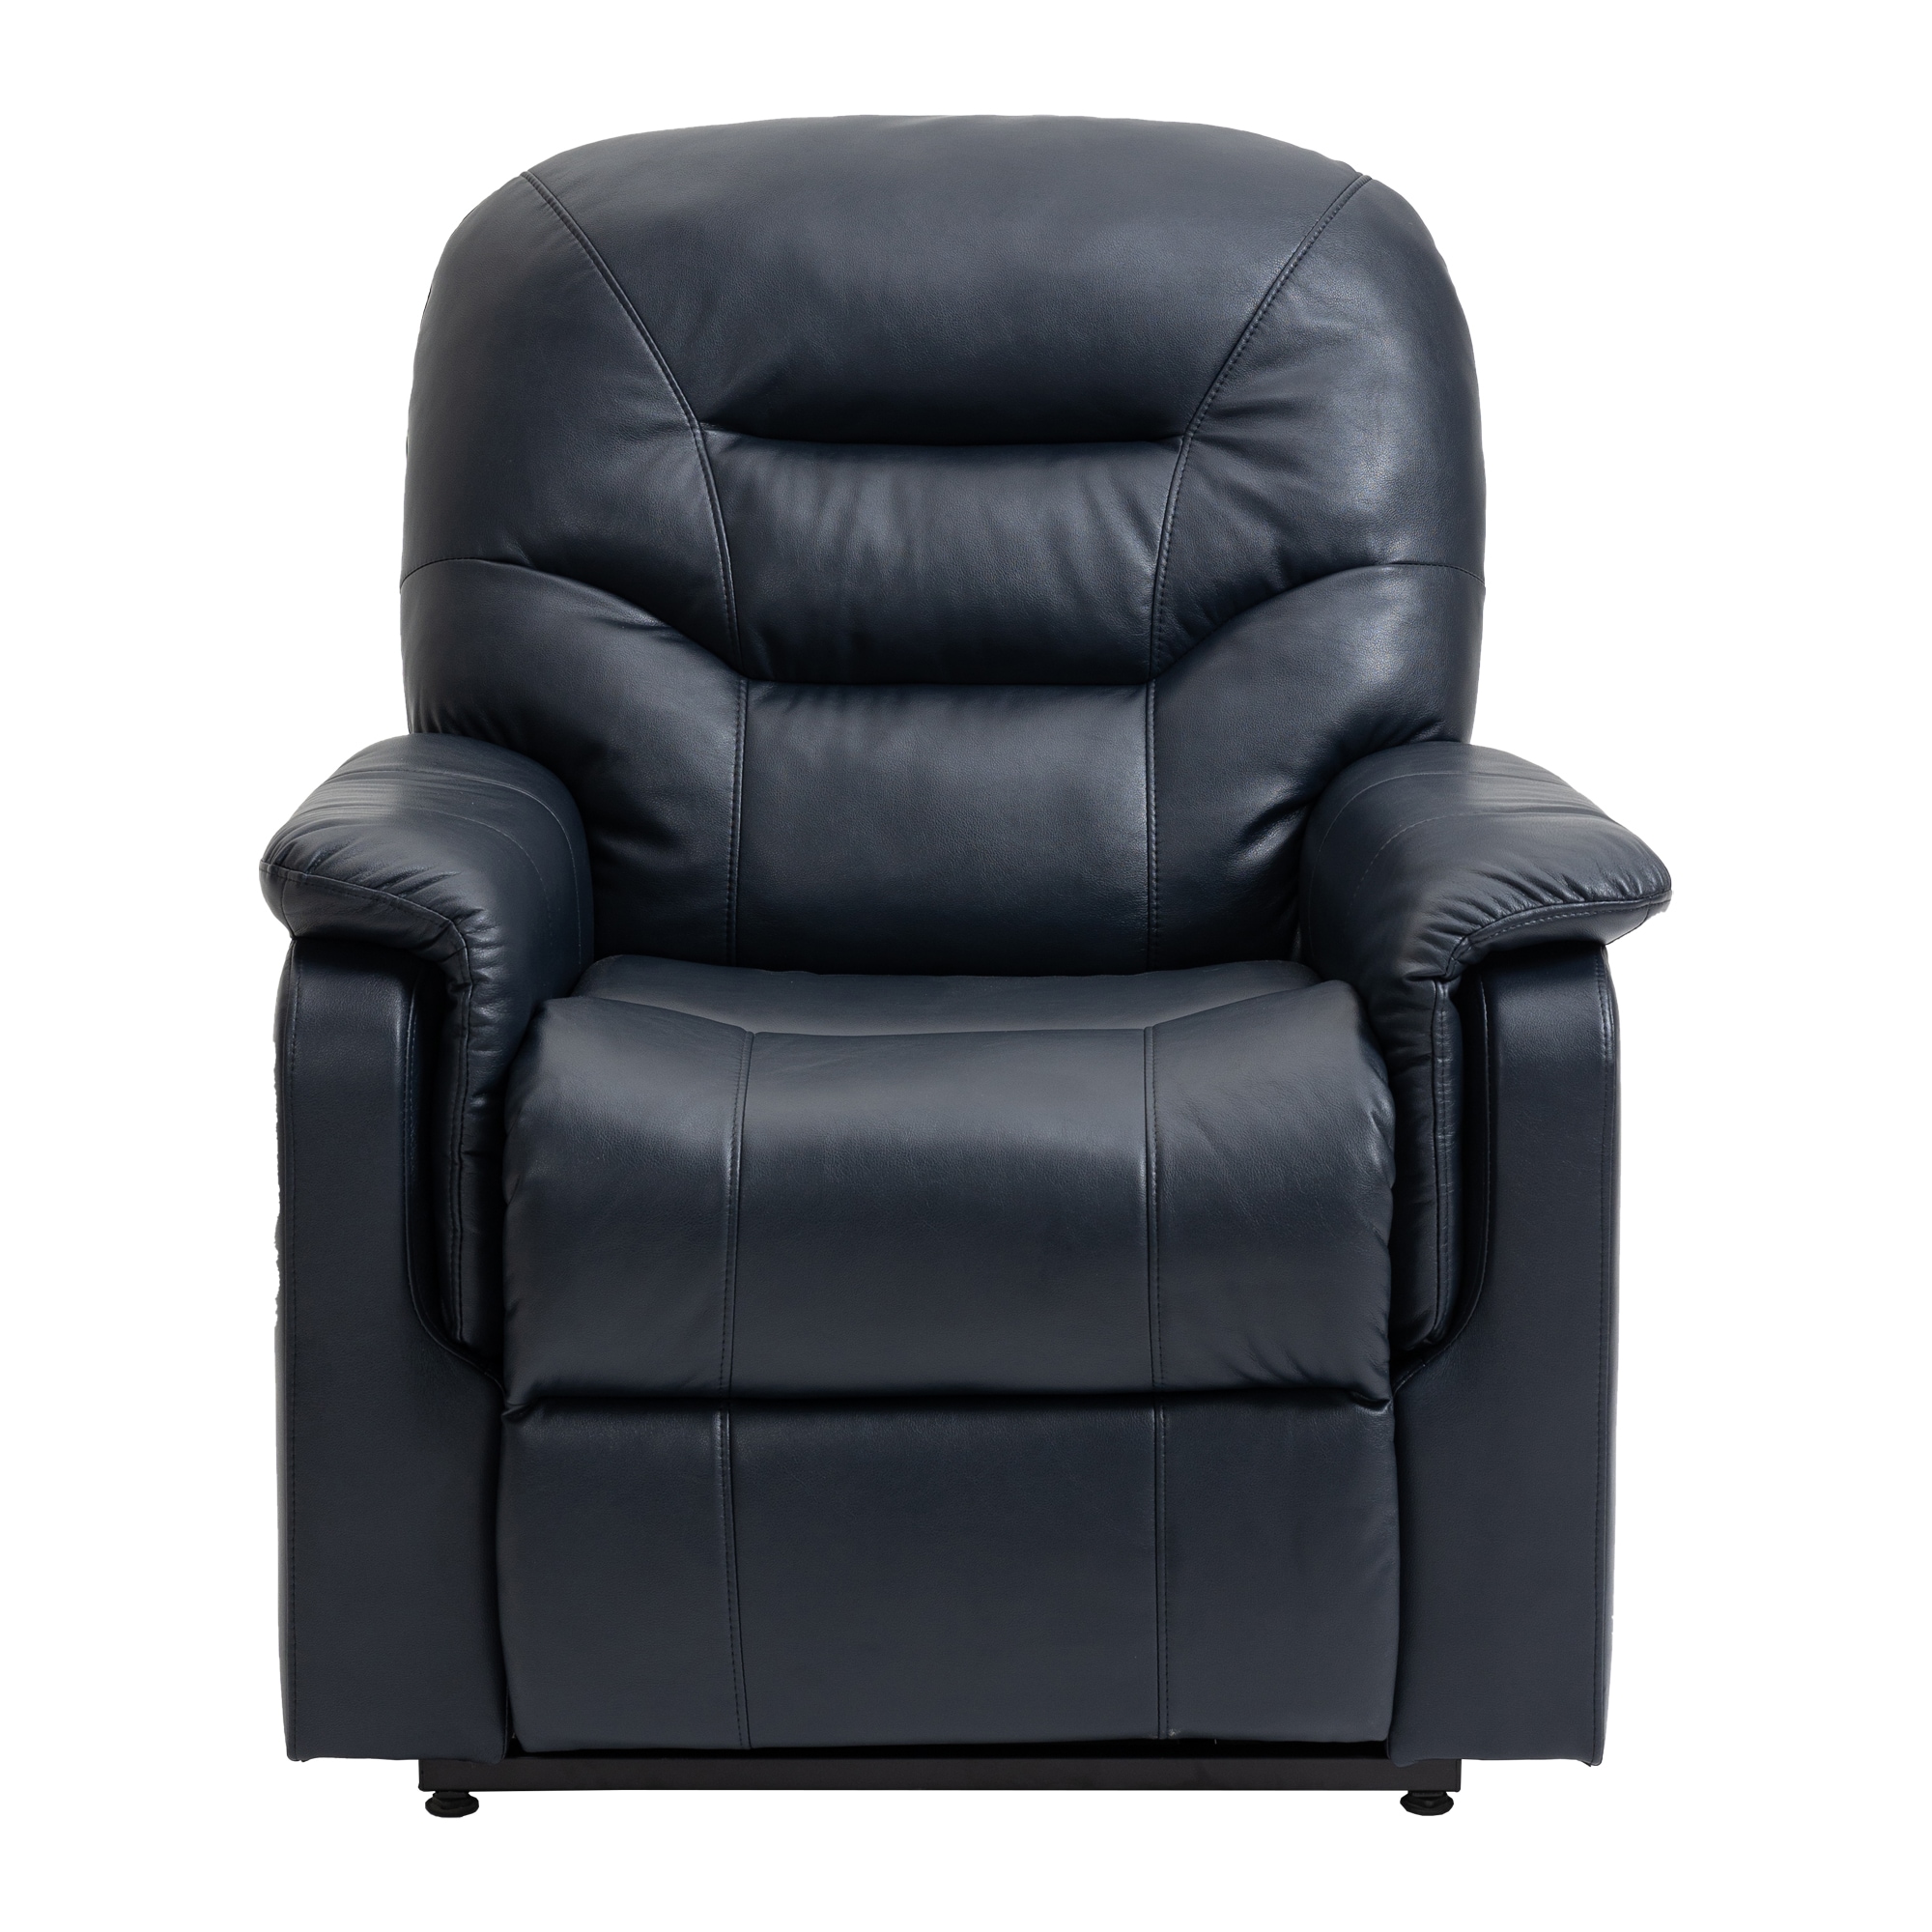 FC Design Black Linen Manual Recliner with Overstuffed Cushions